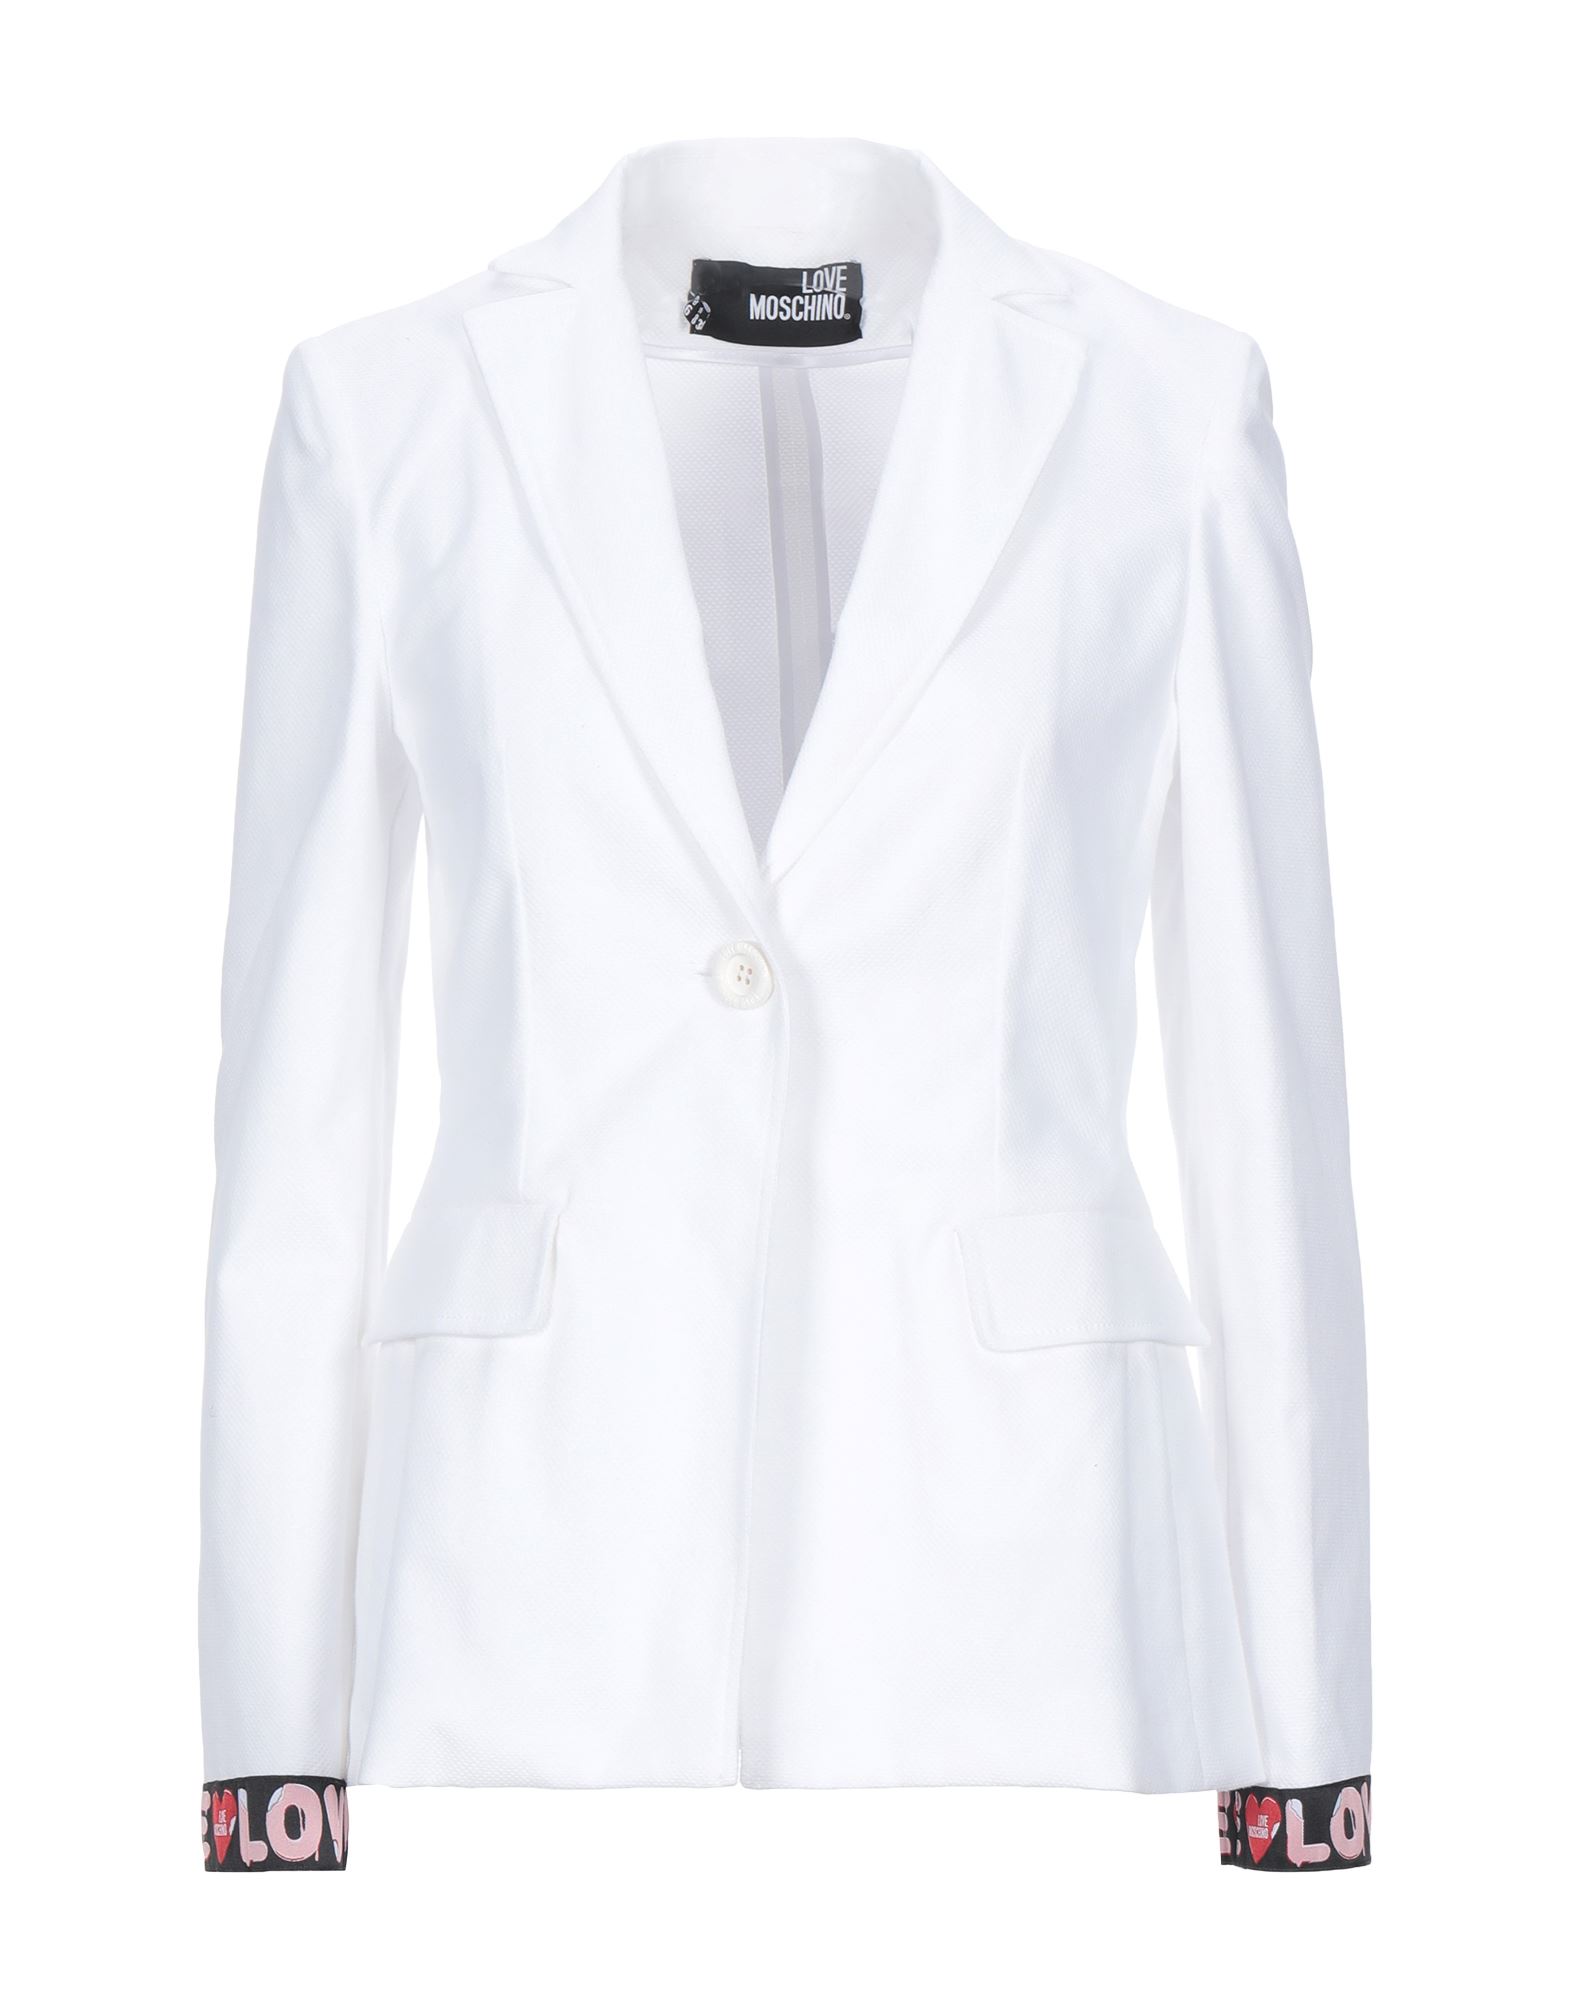 LOVE MOSCHINO Suit jackets - Item 49612362